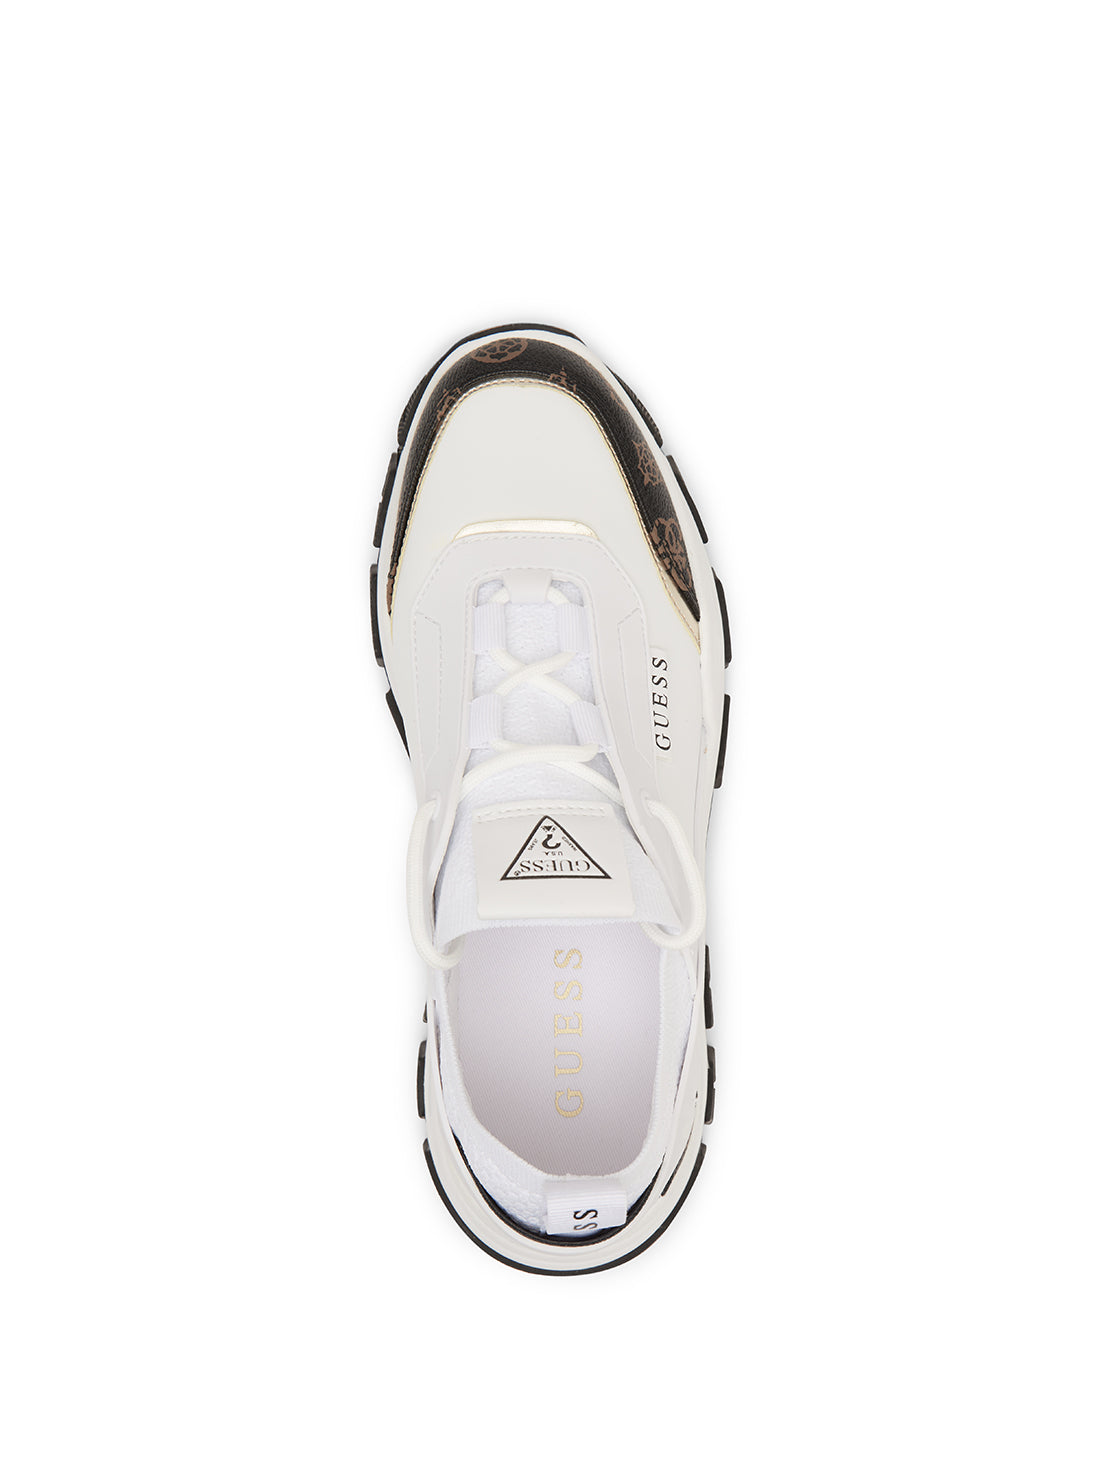 GUESS Women's White Braydin Low Top Sneakers BRAYDIN Top View